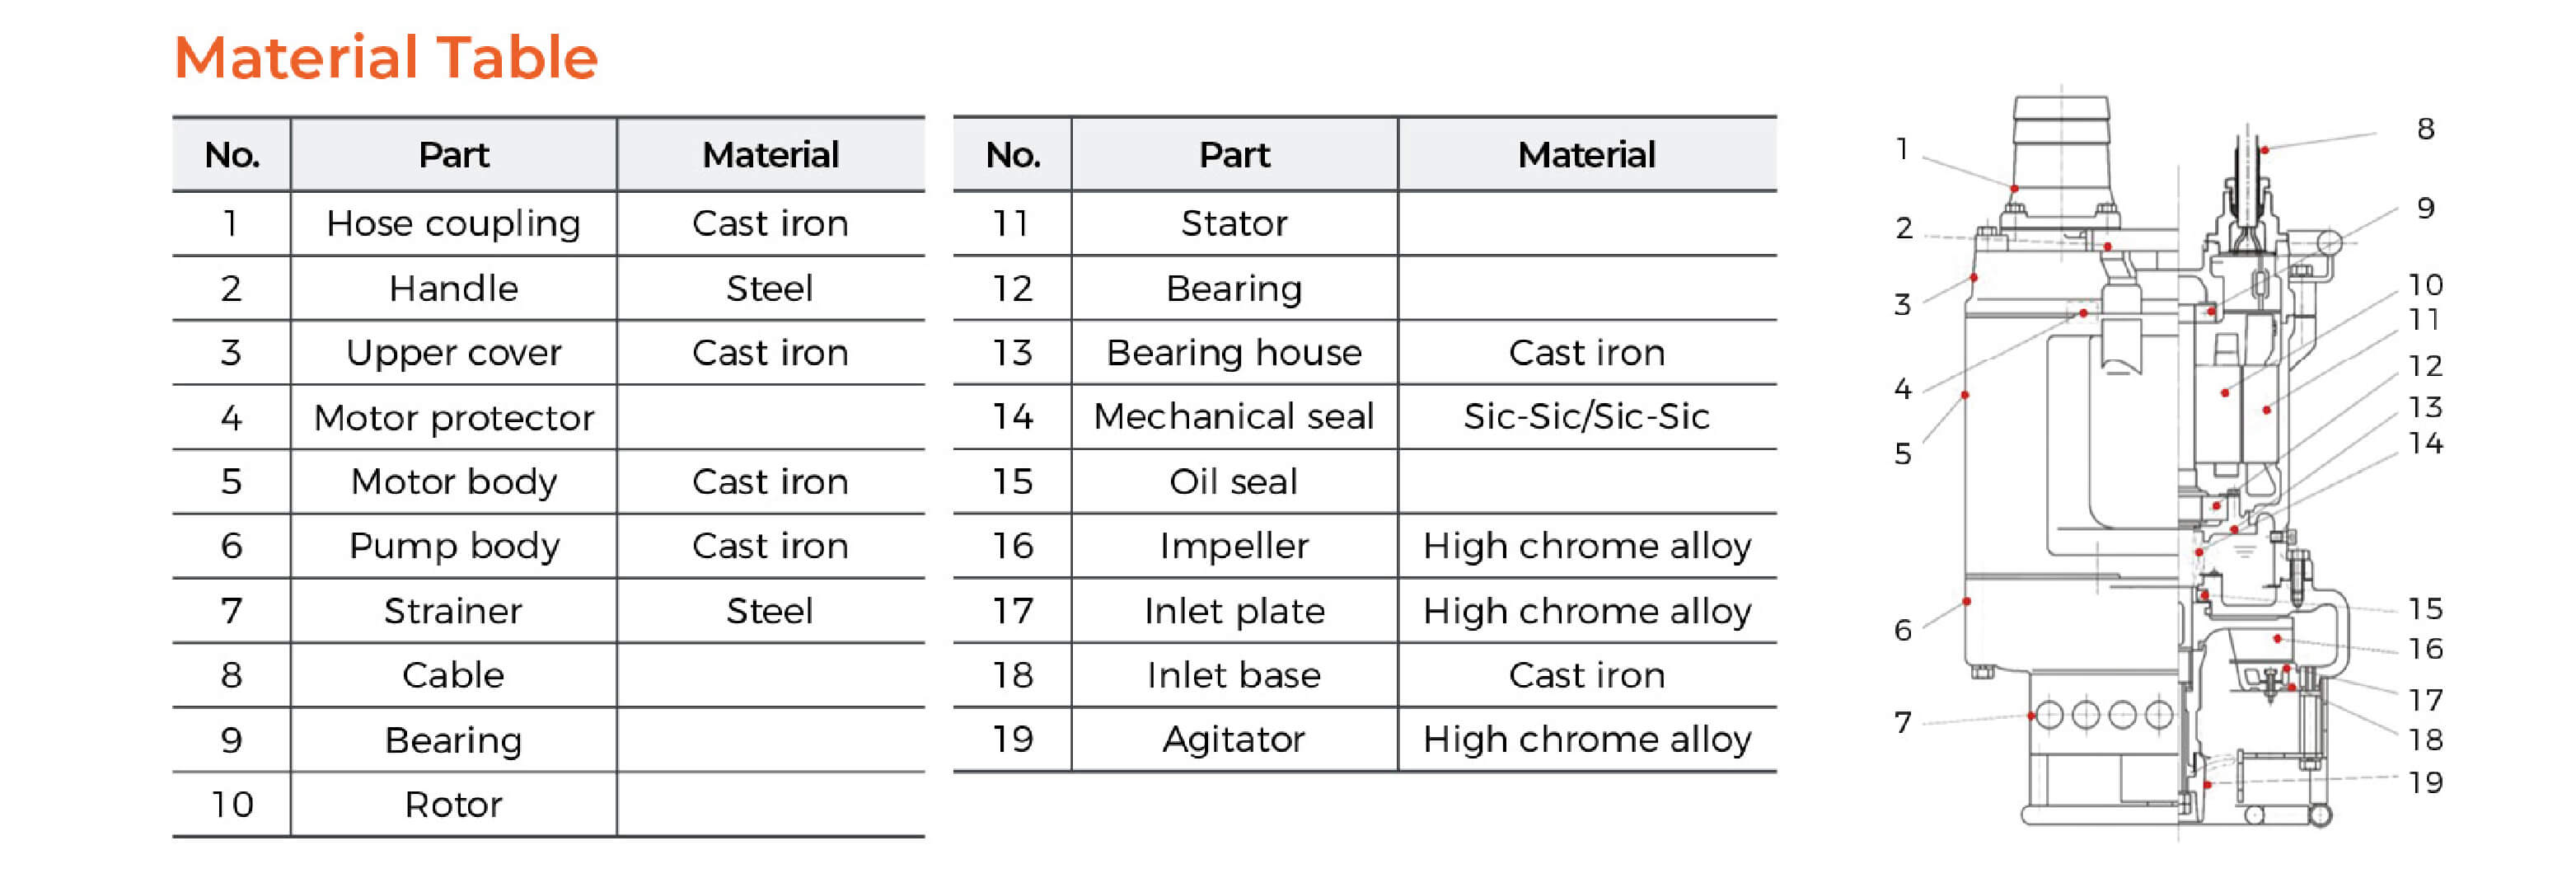 KBS Submersible Slurry Pump Material Table